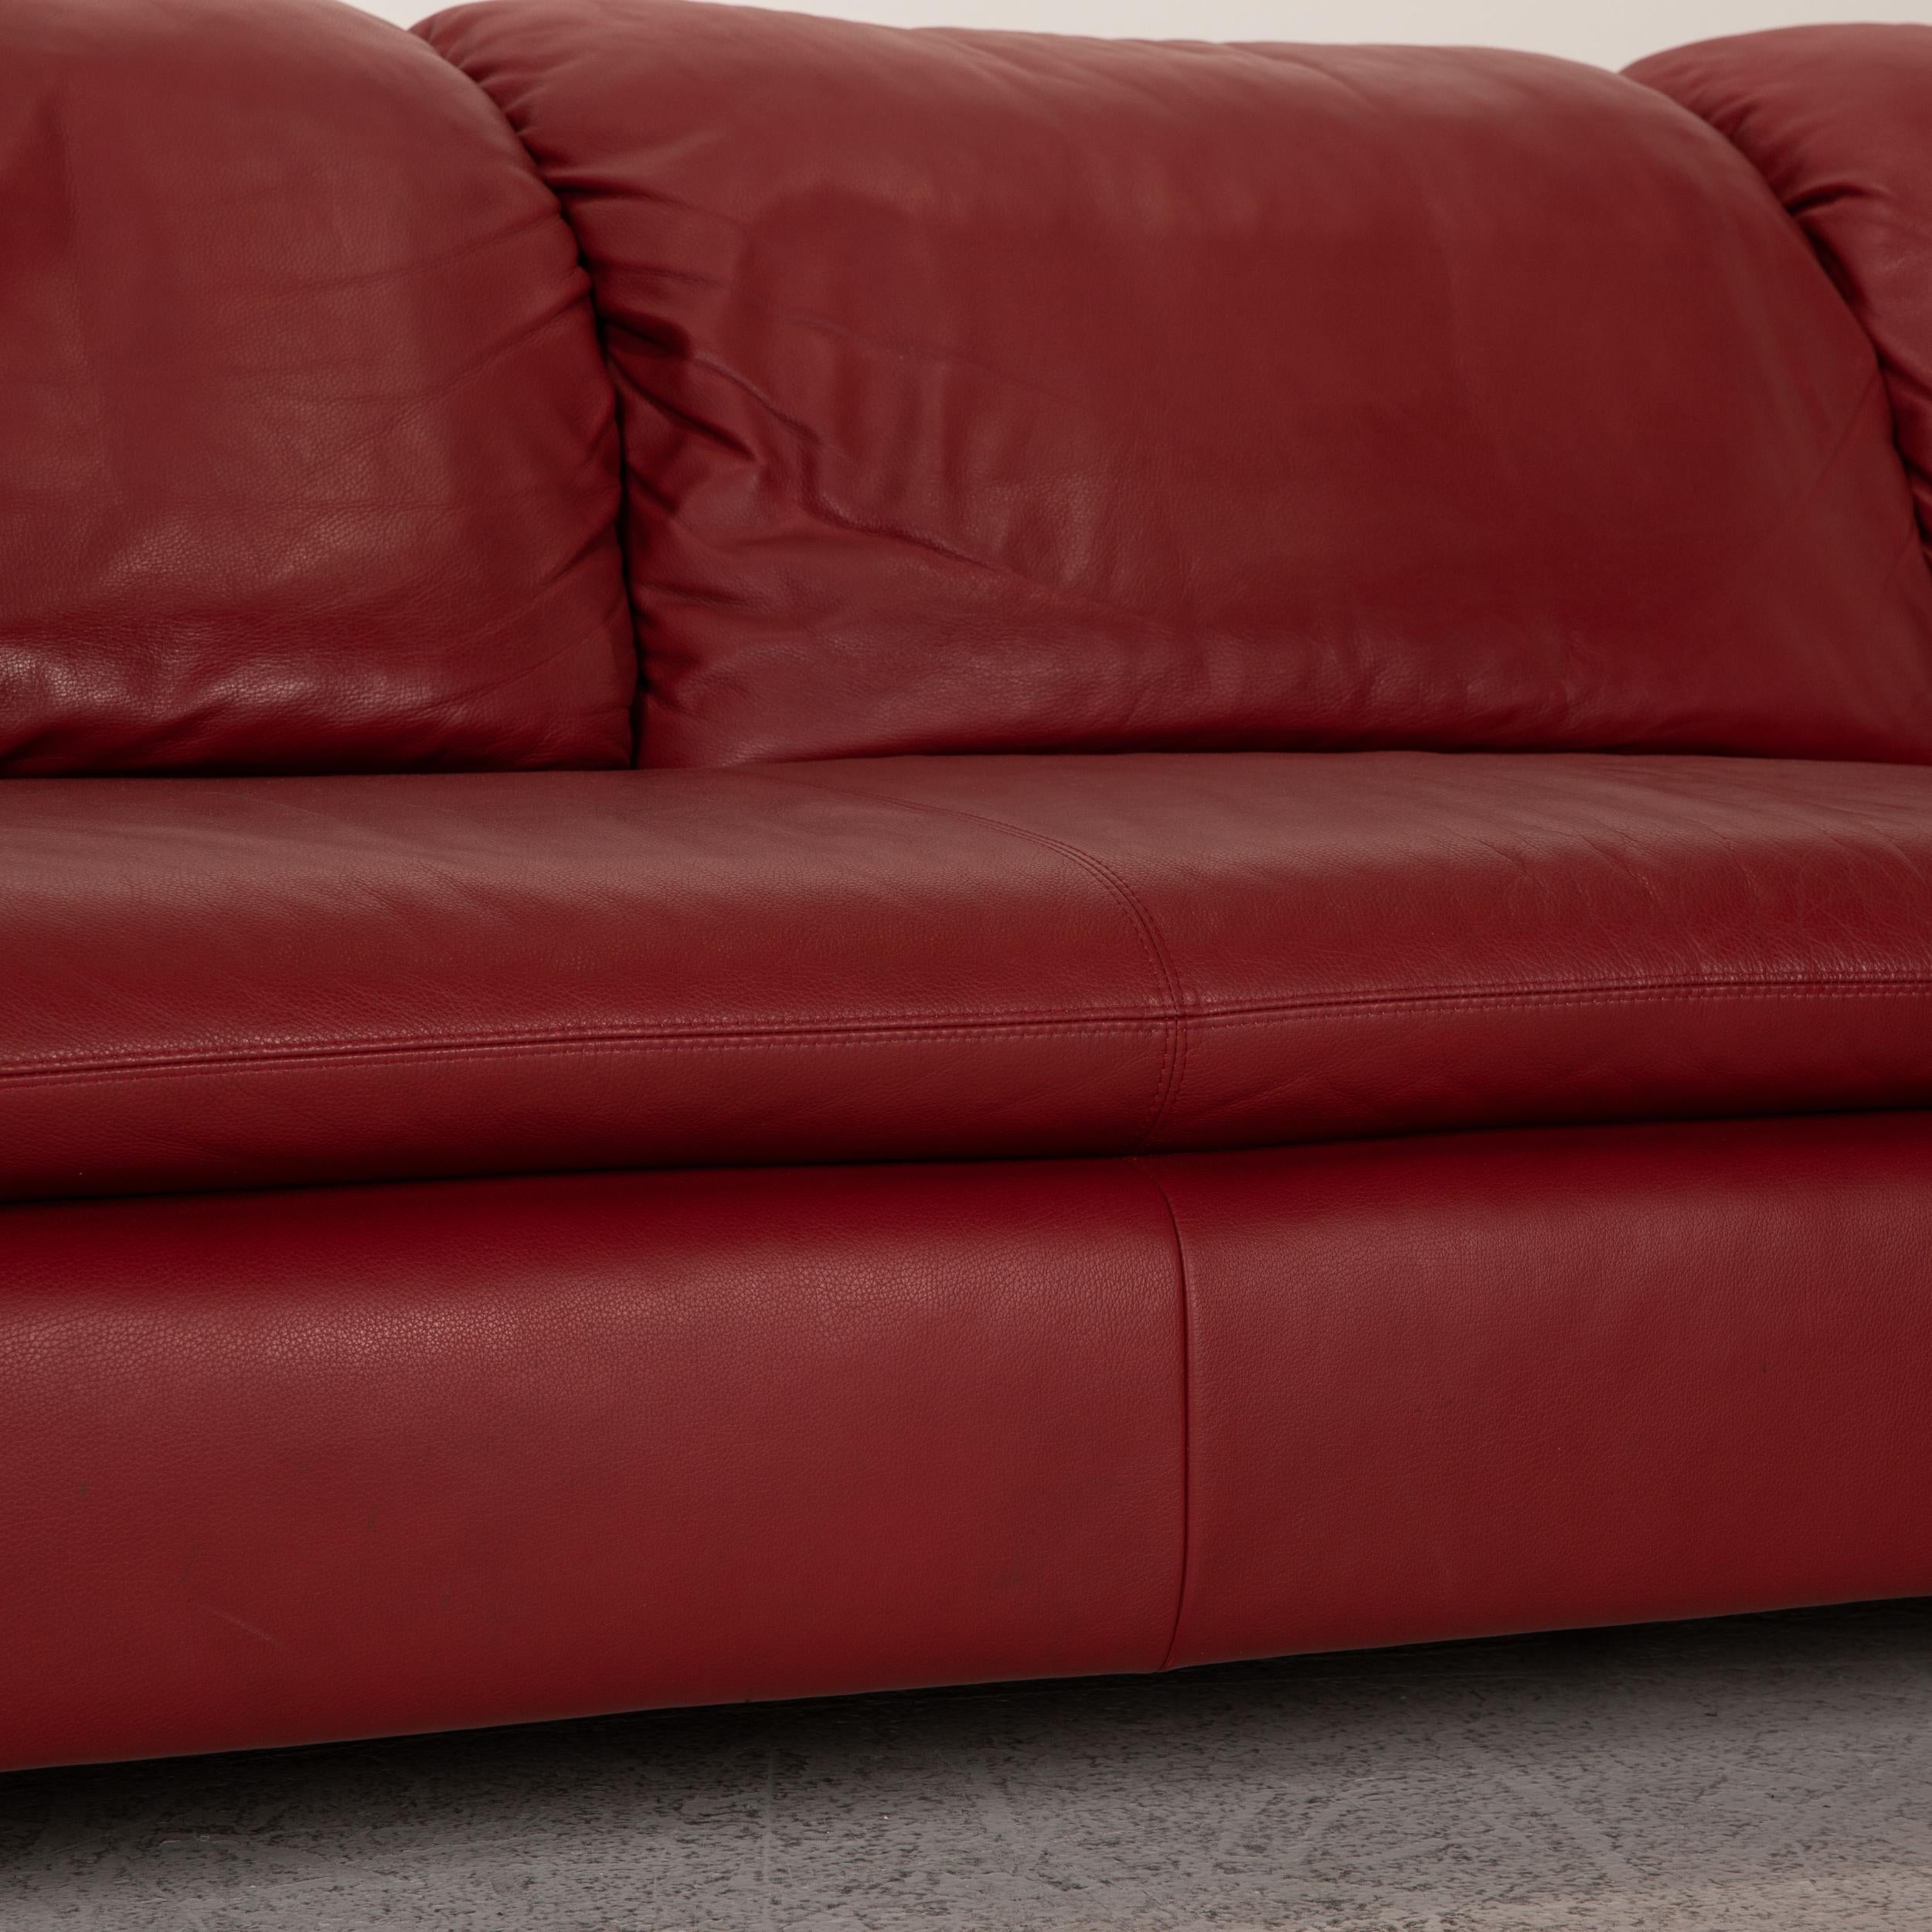 German Willi Schillig Amore Leather Sofa Red Corner Sofa Couch Function For Sale